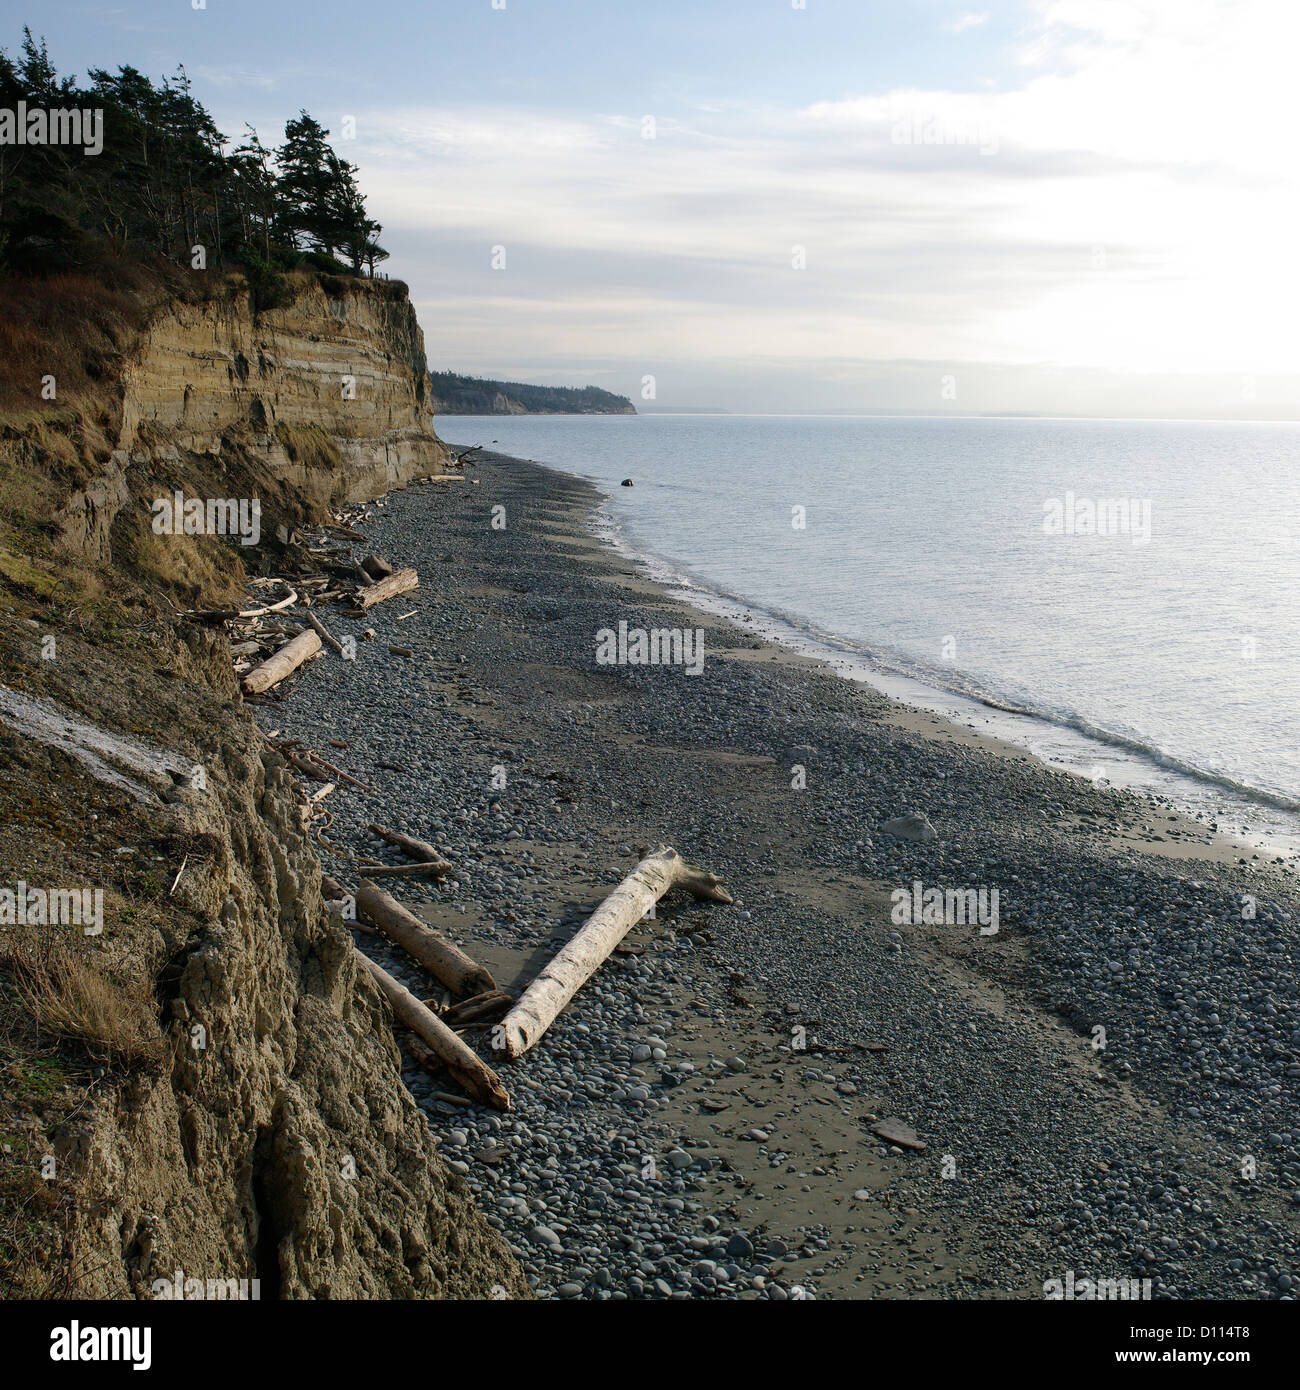 The shoreline of West Beach on Whidbey Island, Washington, USA recedes towards the horizon on a sunny late afternoon. Stock Photo